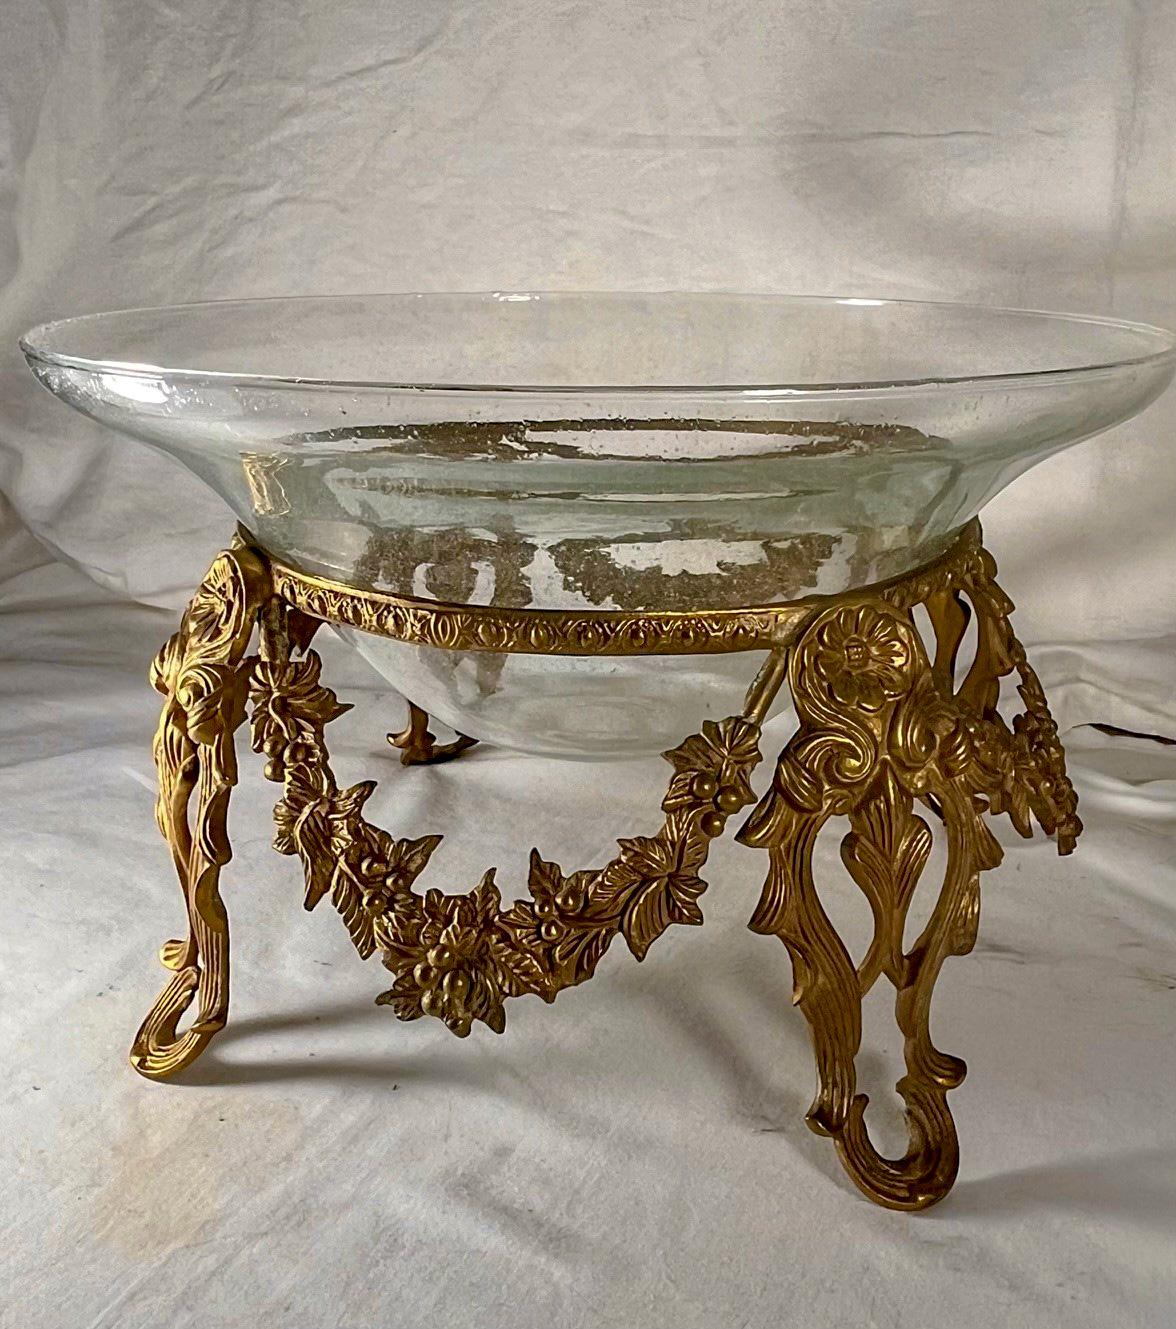 Cast Vintage Large Art Glass Bowl Tazza Centerpiece Bowl in Brass Stand For Sale